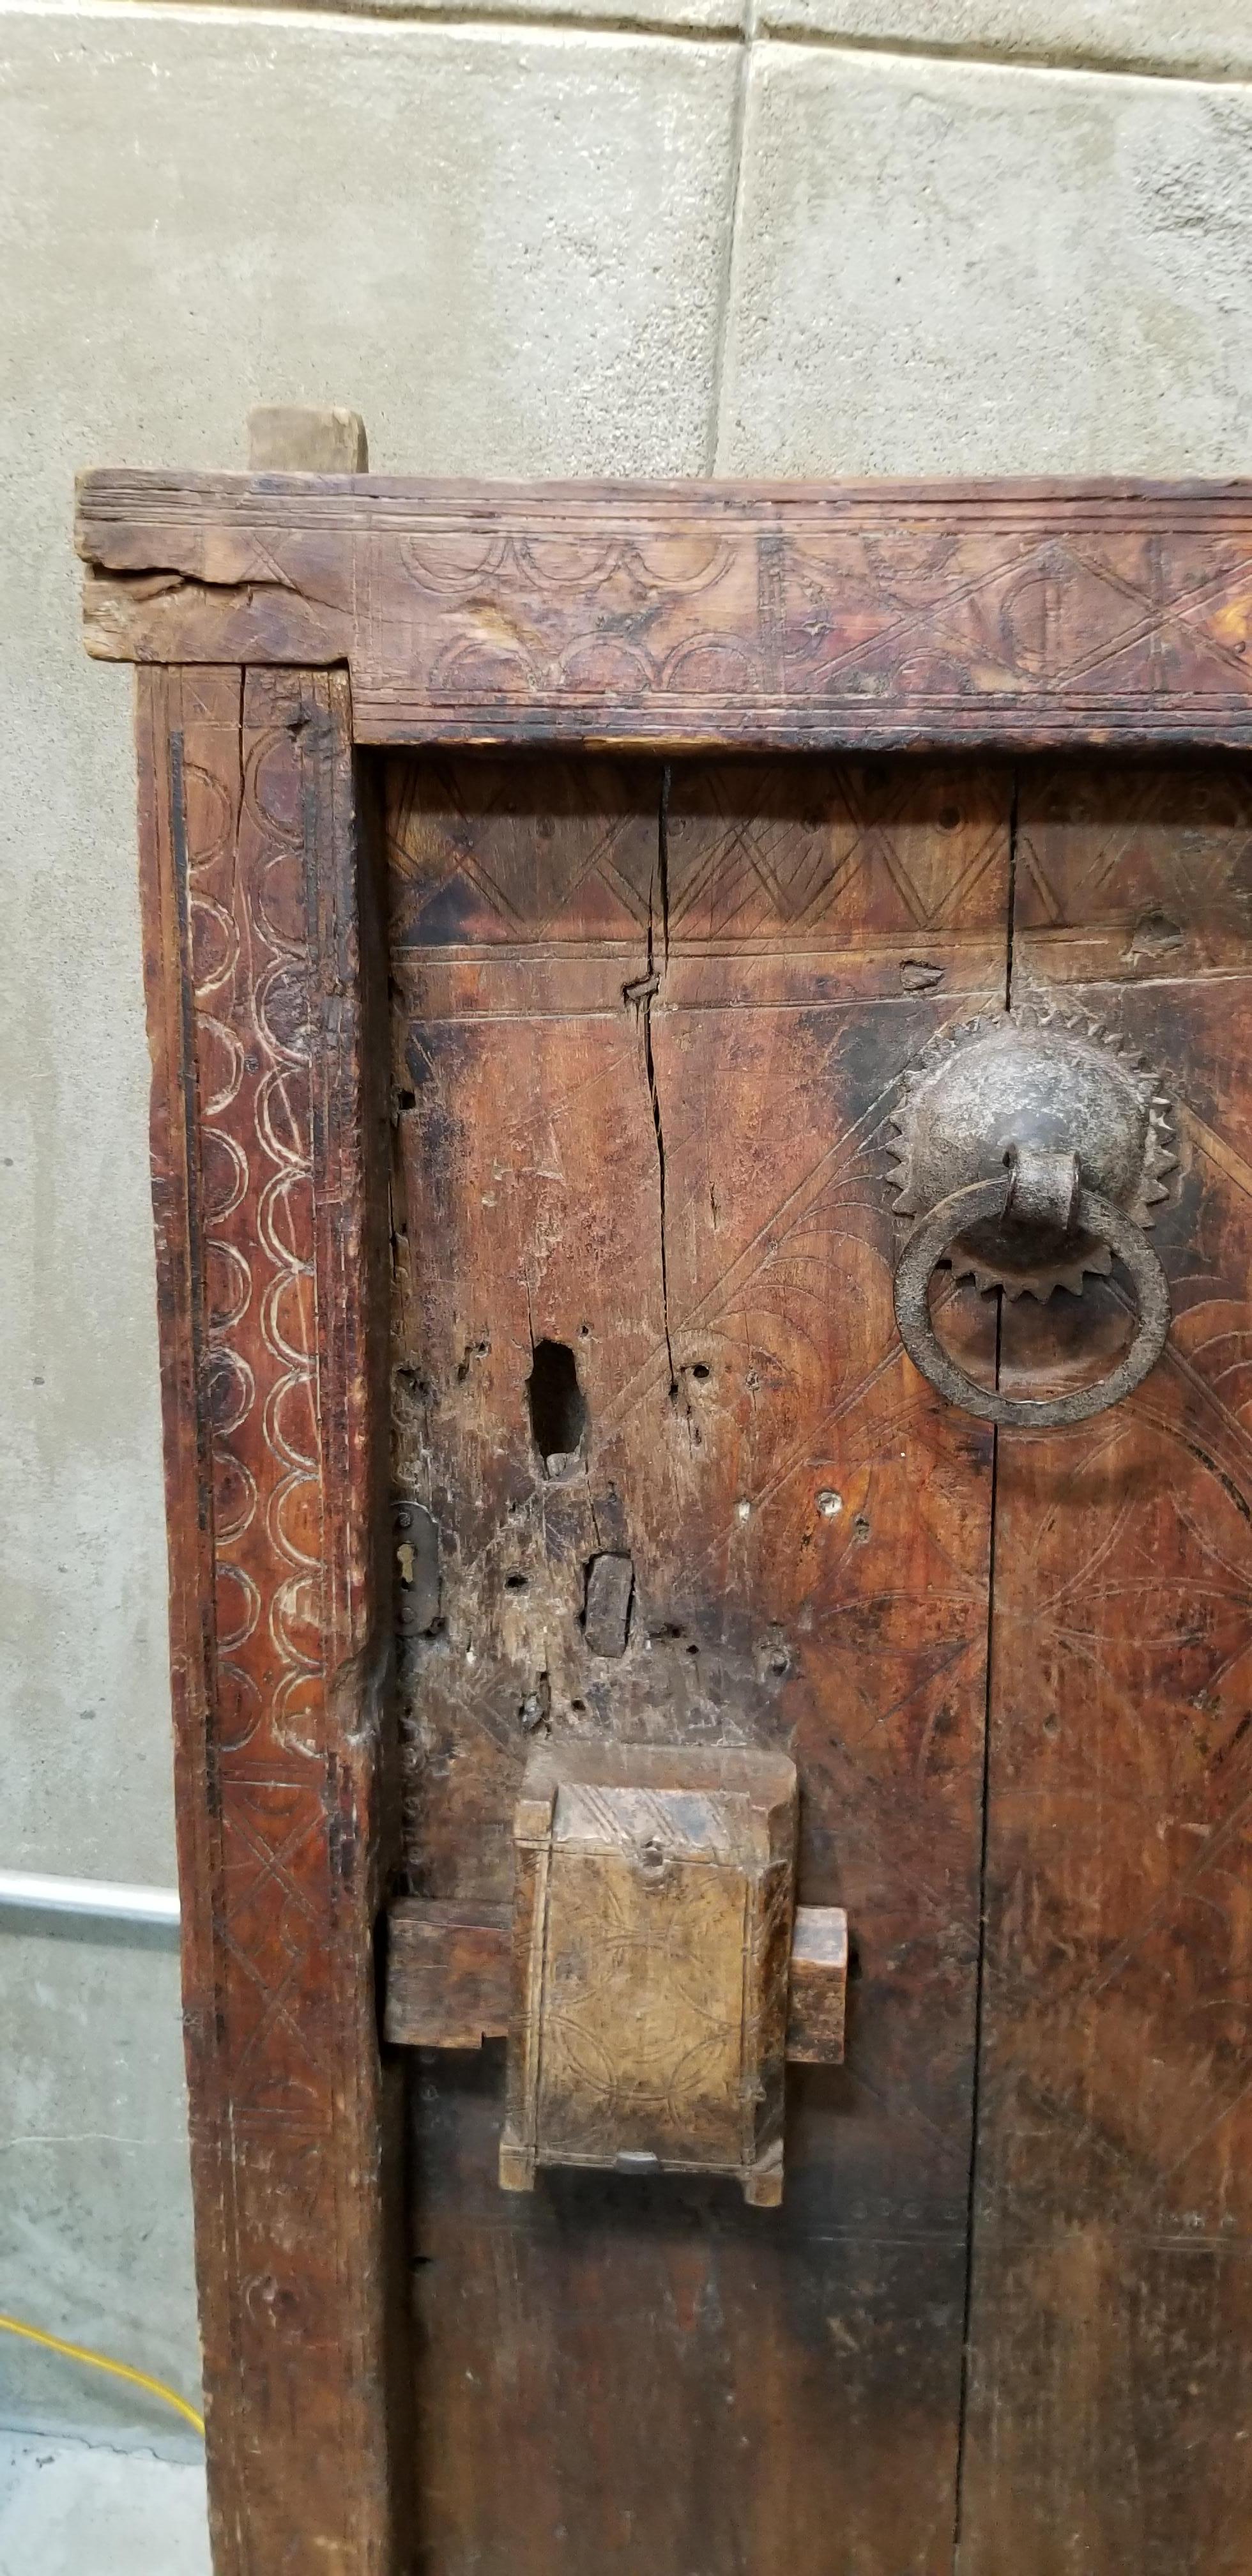 Handcrafted granary door from the Mali tribe, West Africa. Shows its decades of use with beautiful wear and patina with lots of character. Retains original door casing and/or frame. Slide lock mechanism intact. Geometric hand-scribed carved detail.